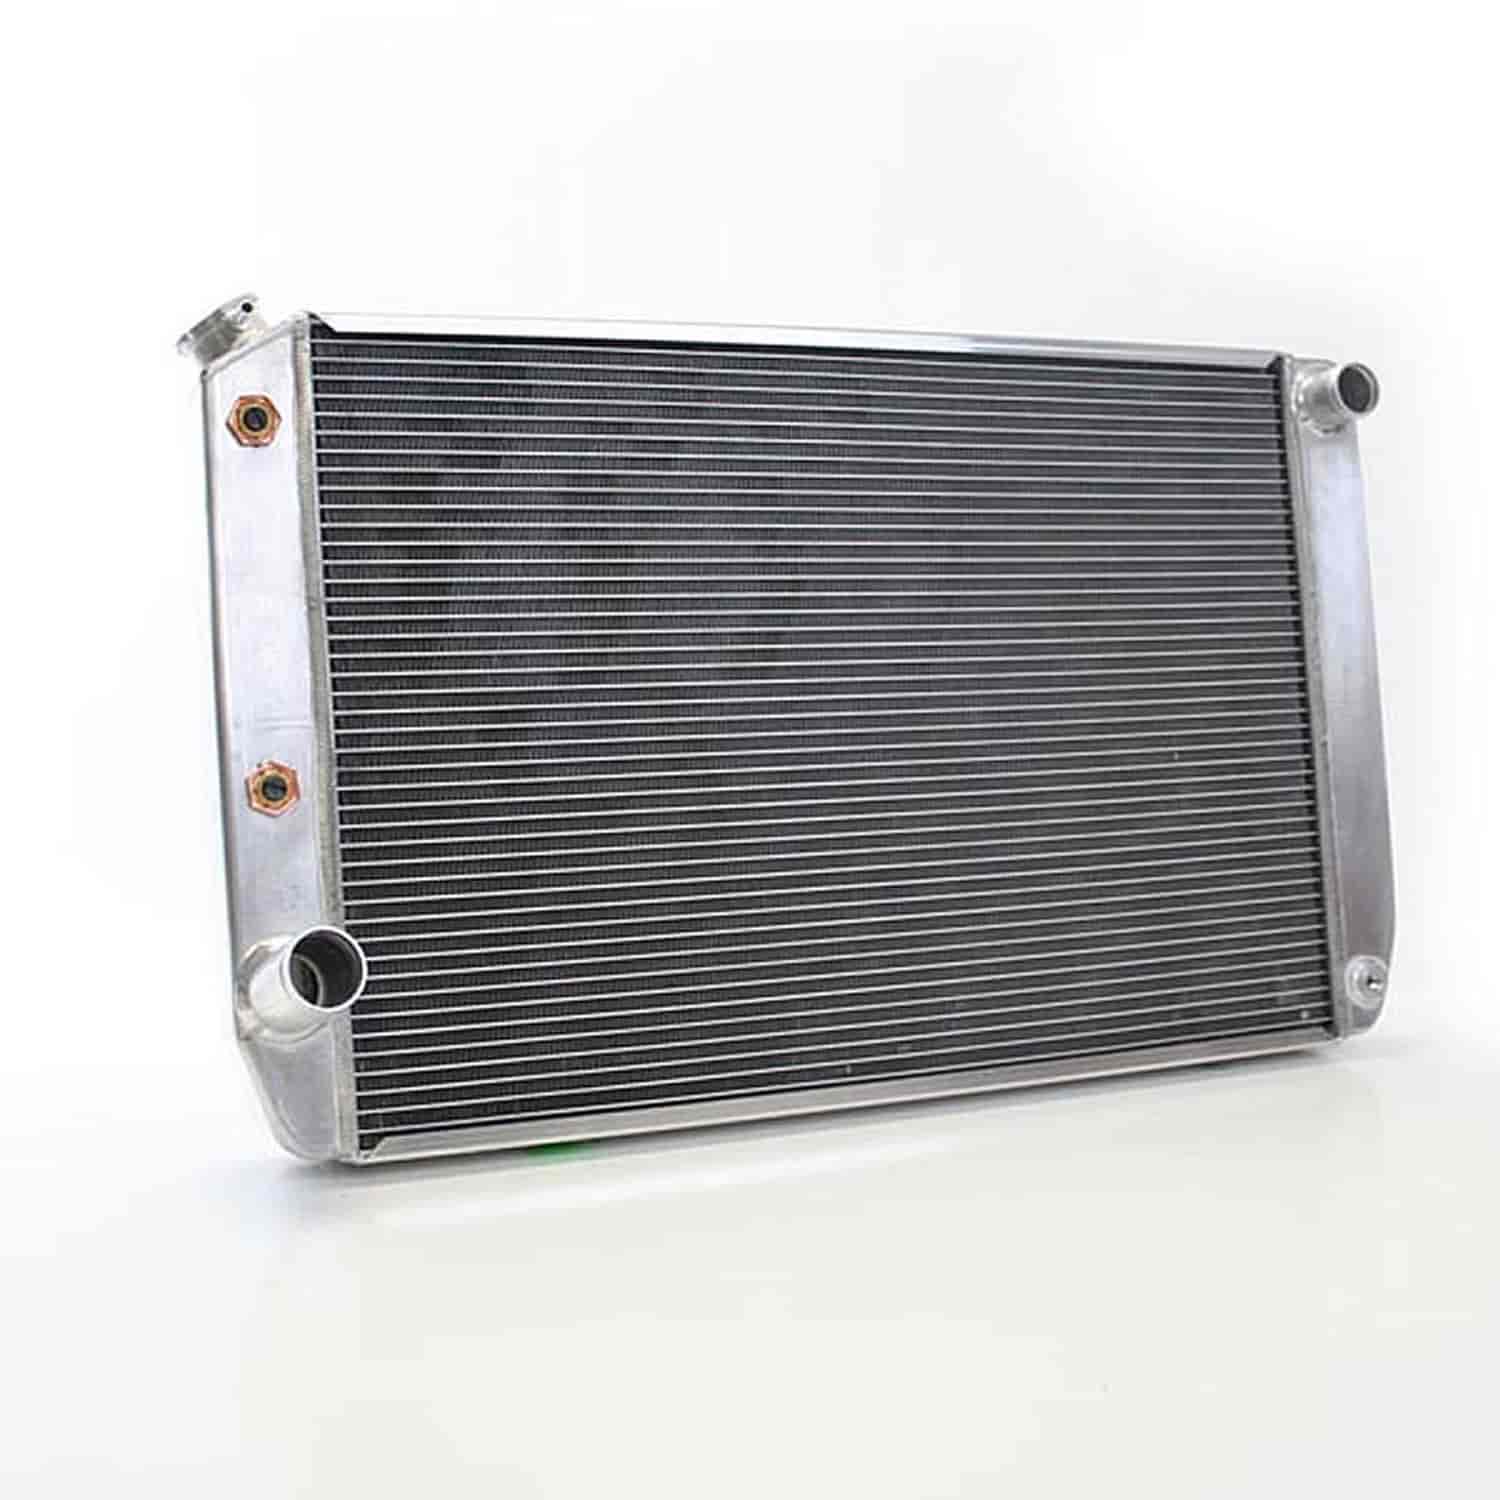 PerformanceFit Radiator 1969-1973 Ford Midsize & Mustang with Transmission Cooler